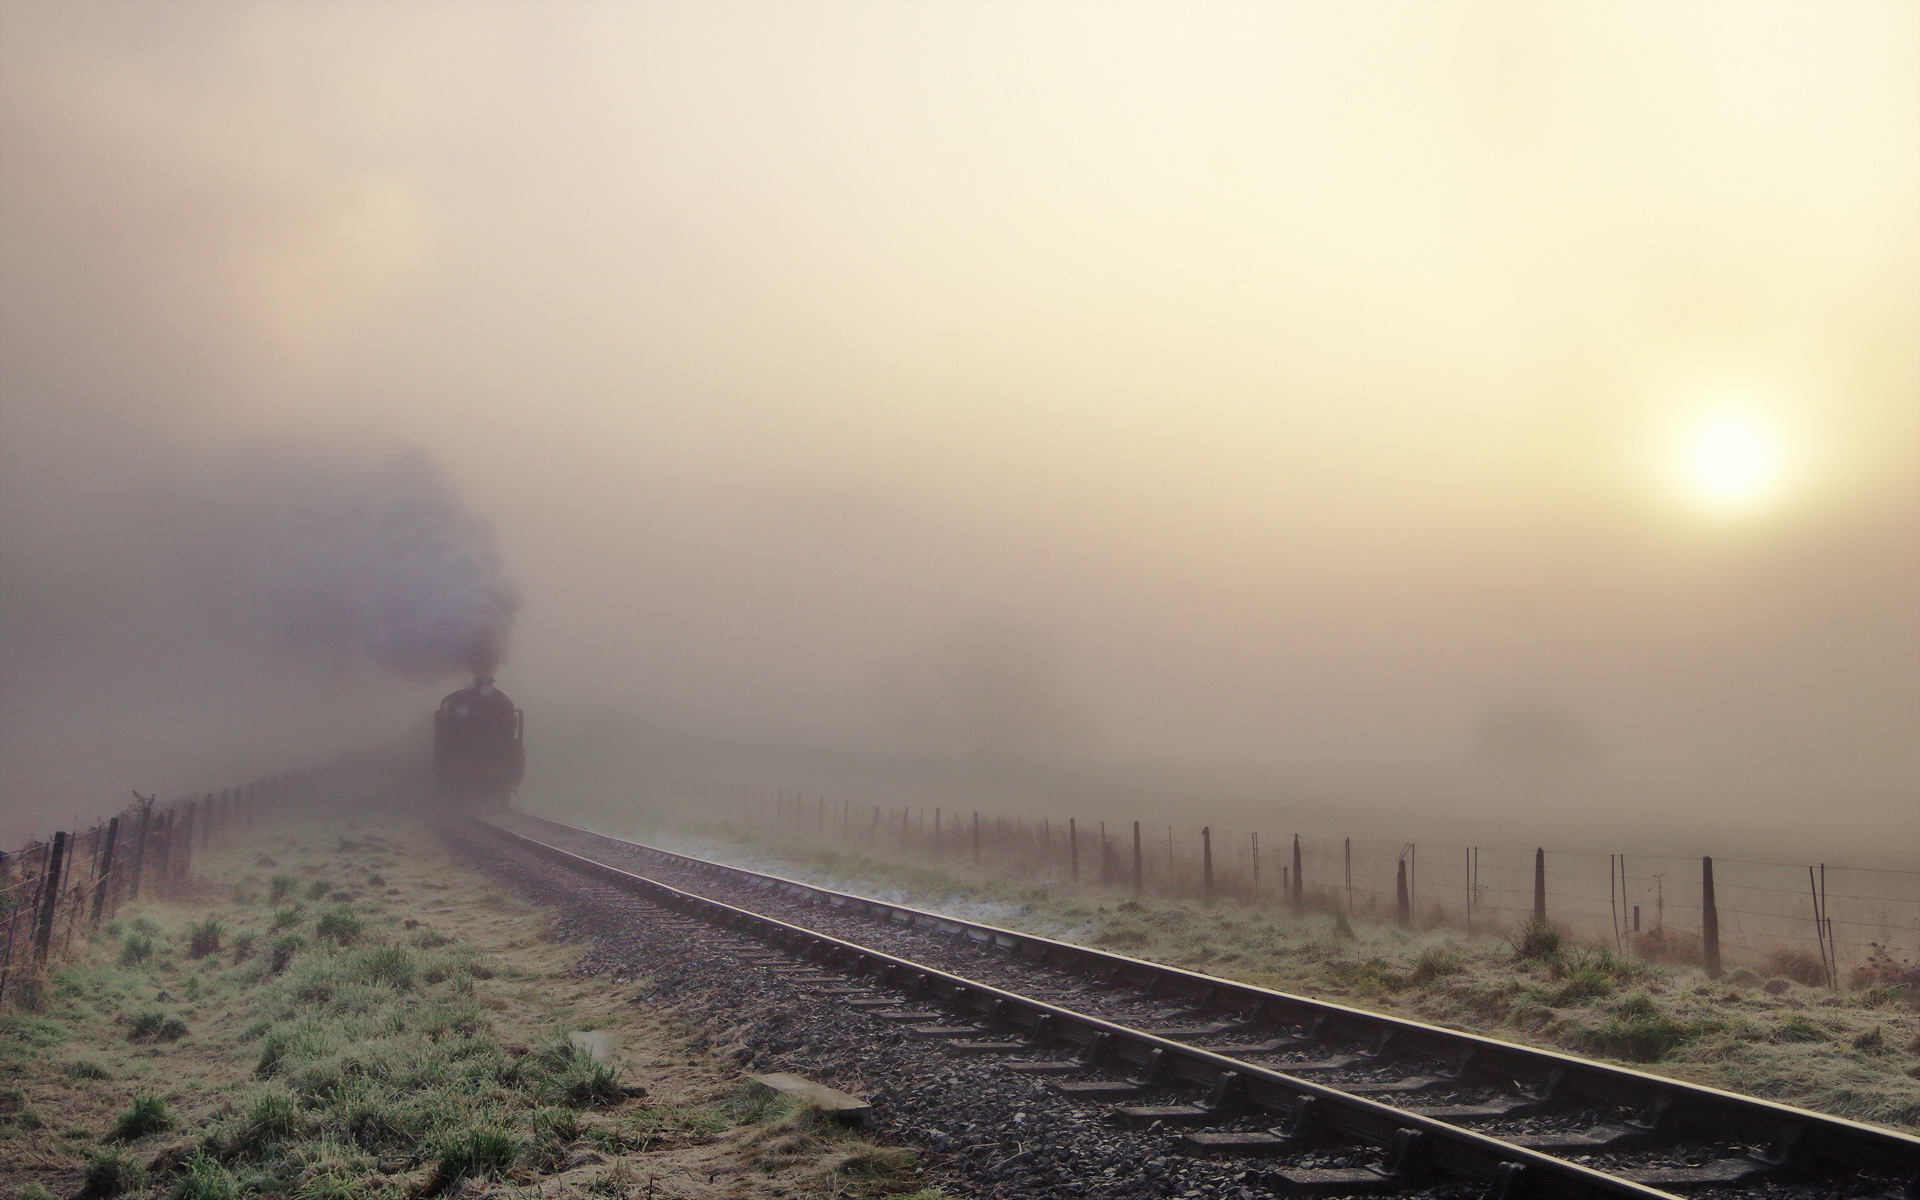 82 trains delayed, 16 cancelled due to fog